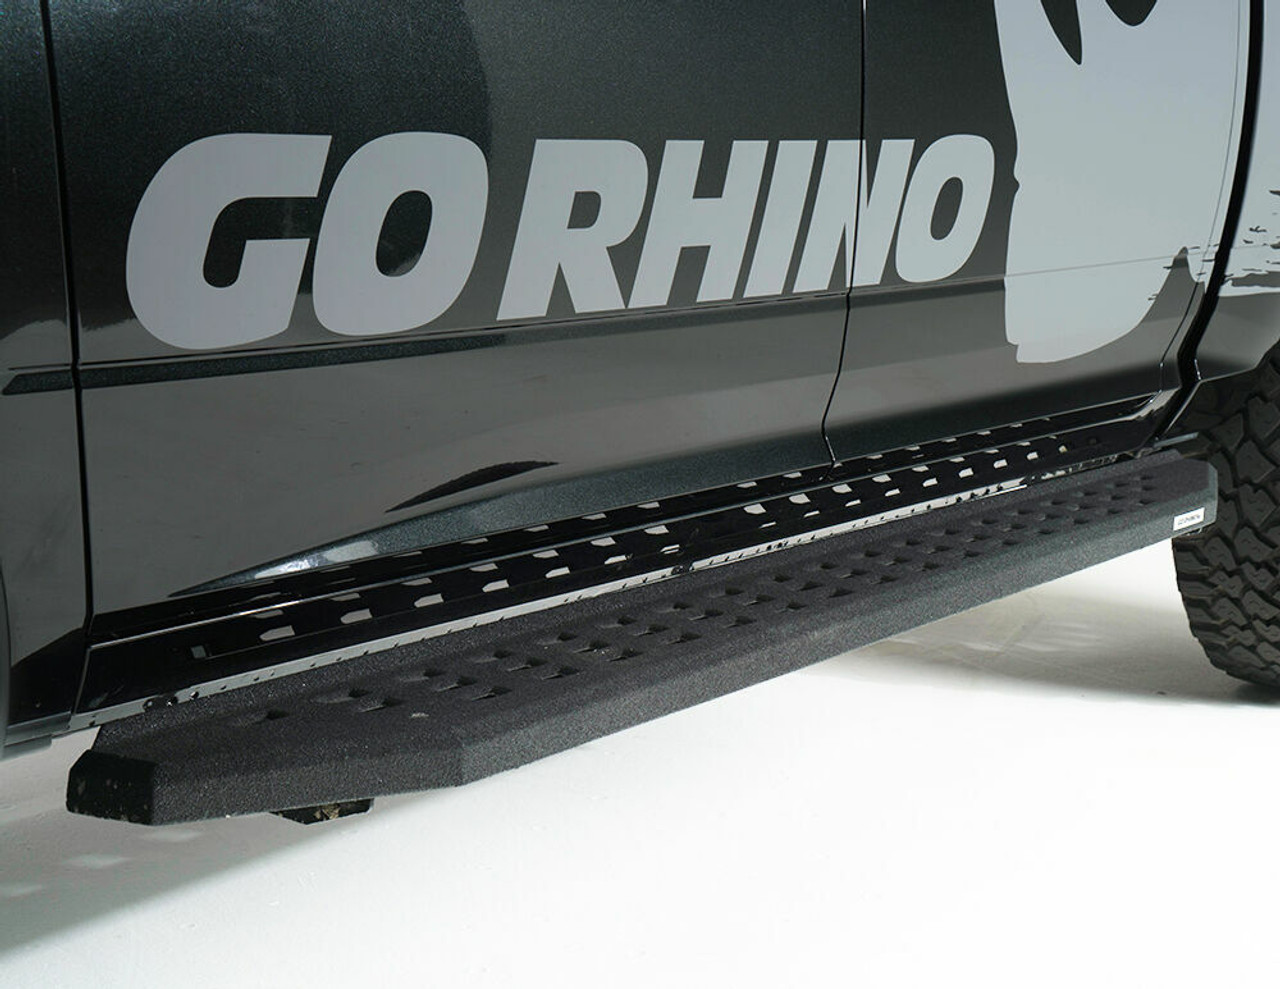 Go Rhino 6941768020PC Ford, F-250, F-350, 1999 - 2016, RB20 Running Boards - Complete Kit: RB20 Boards + Brackets + 2 pair RB20 Drop Steps, Galvanized Steel, Textured black, 69400080PC RB20 + 6941765 RB Brackets + (2) 69420000PC Drop Down Steps